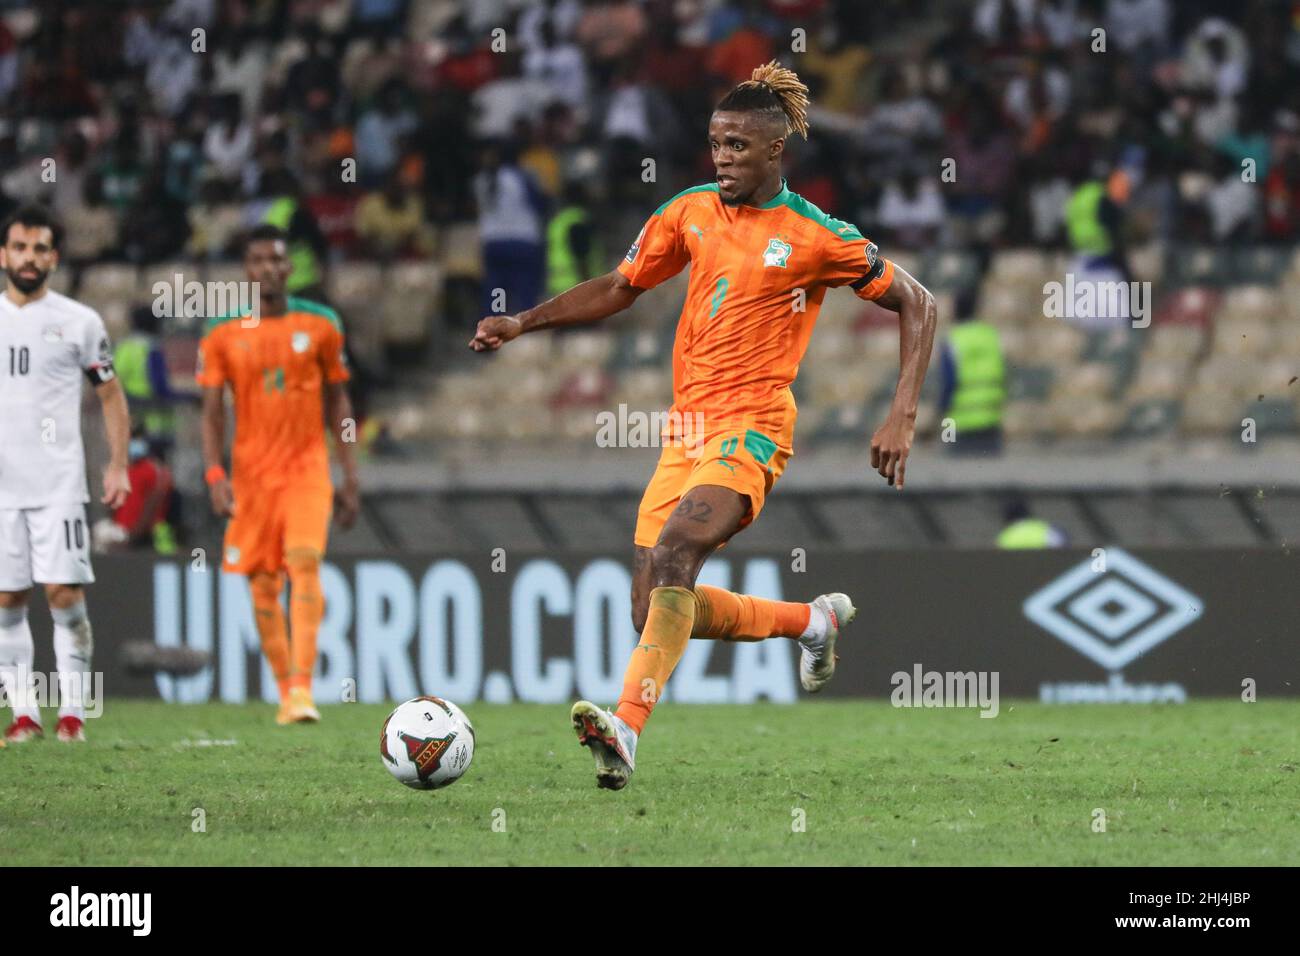 Douala, CAMEROON - JANUARY 26:  Wilfried Zaha of Ivory Coast during the 2021 Africa Cup of Nations Play Offs - 1/8-finals match between Ivory Coast and Egypt at Japoma Stadium, Douala, January 26, 2022 in Douala, Cameroon. (Photo by SF) Credit: Sebo47/Alamy Live News Stock Photo